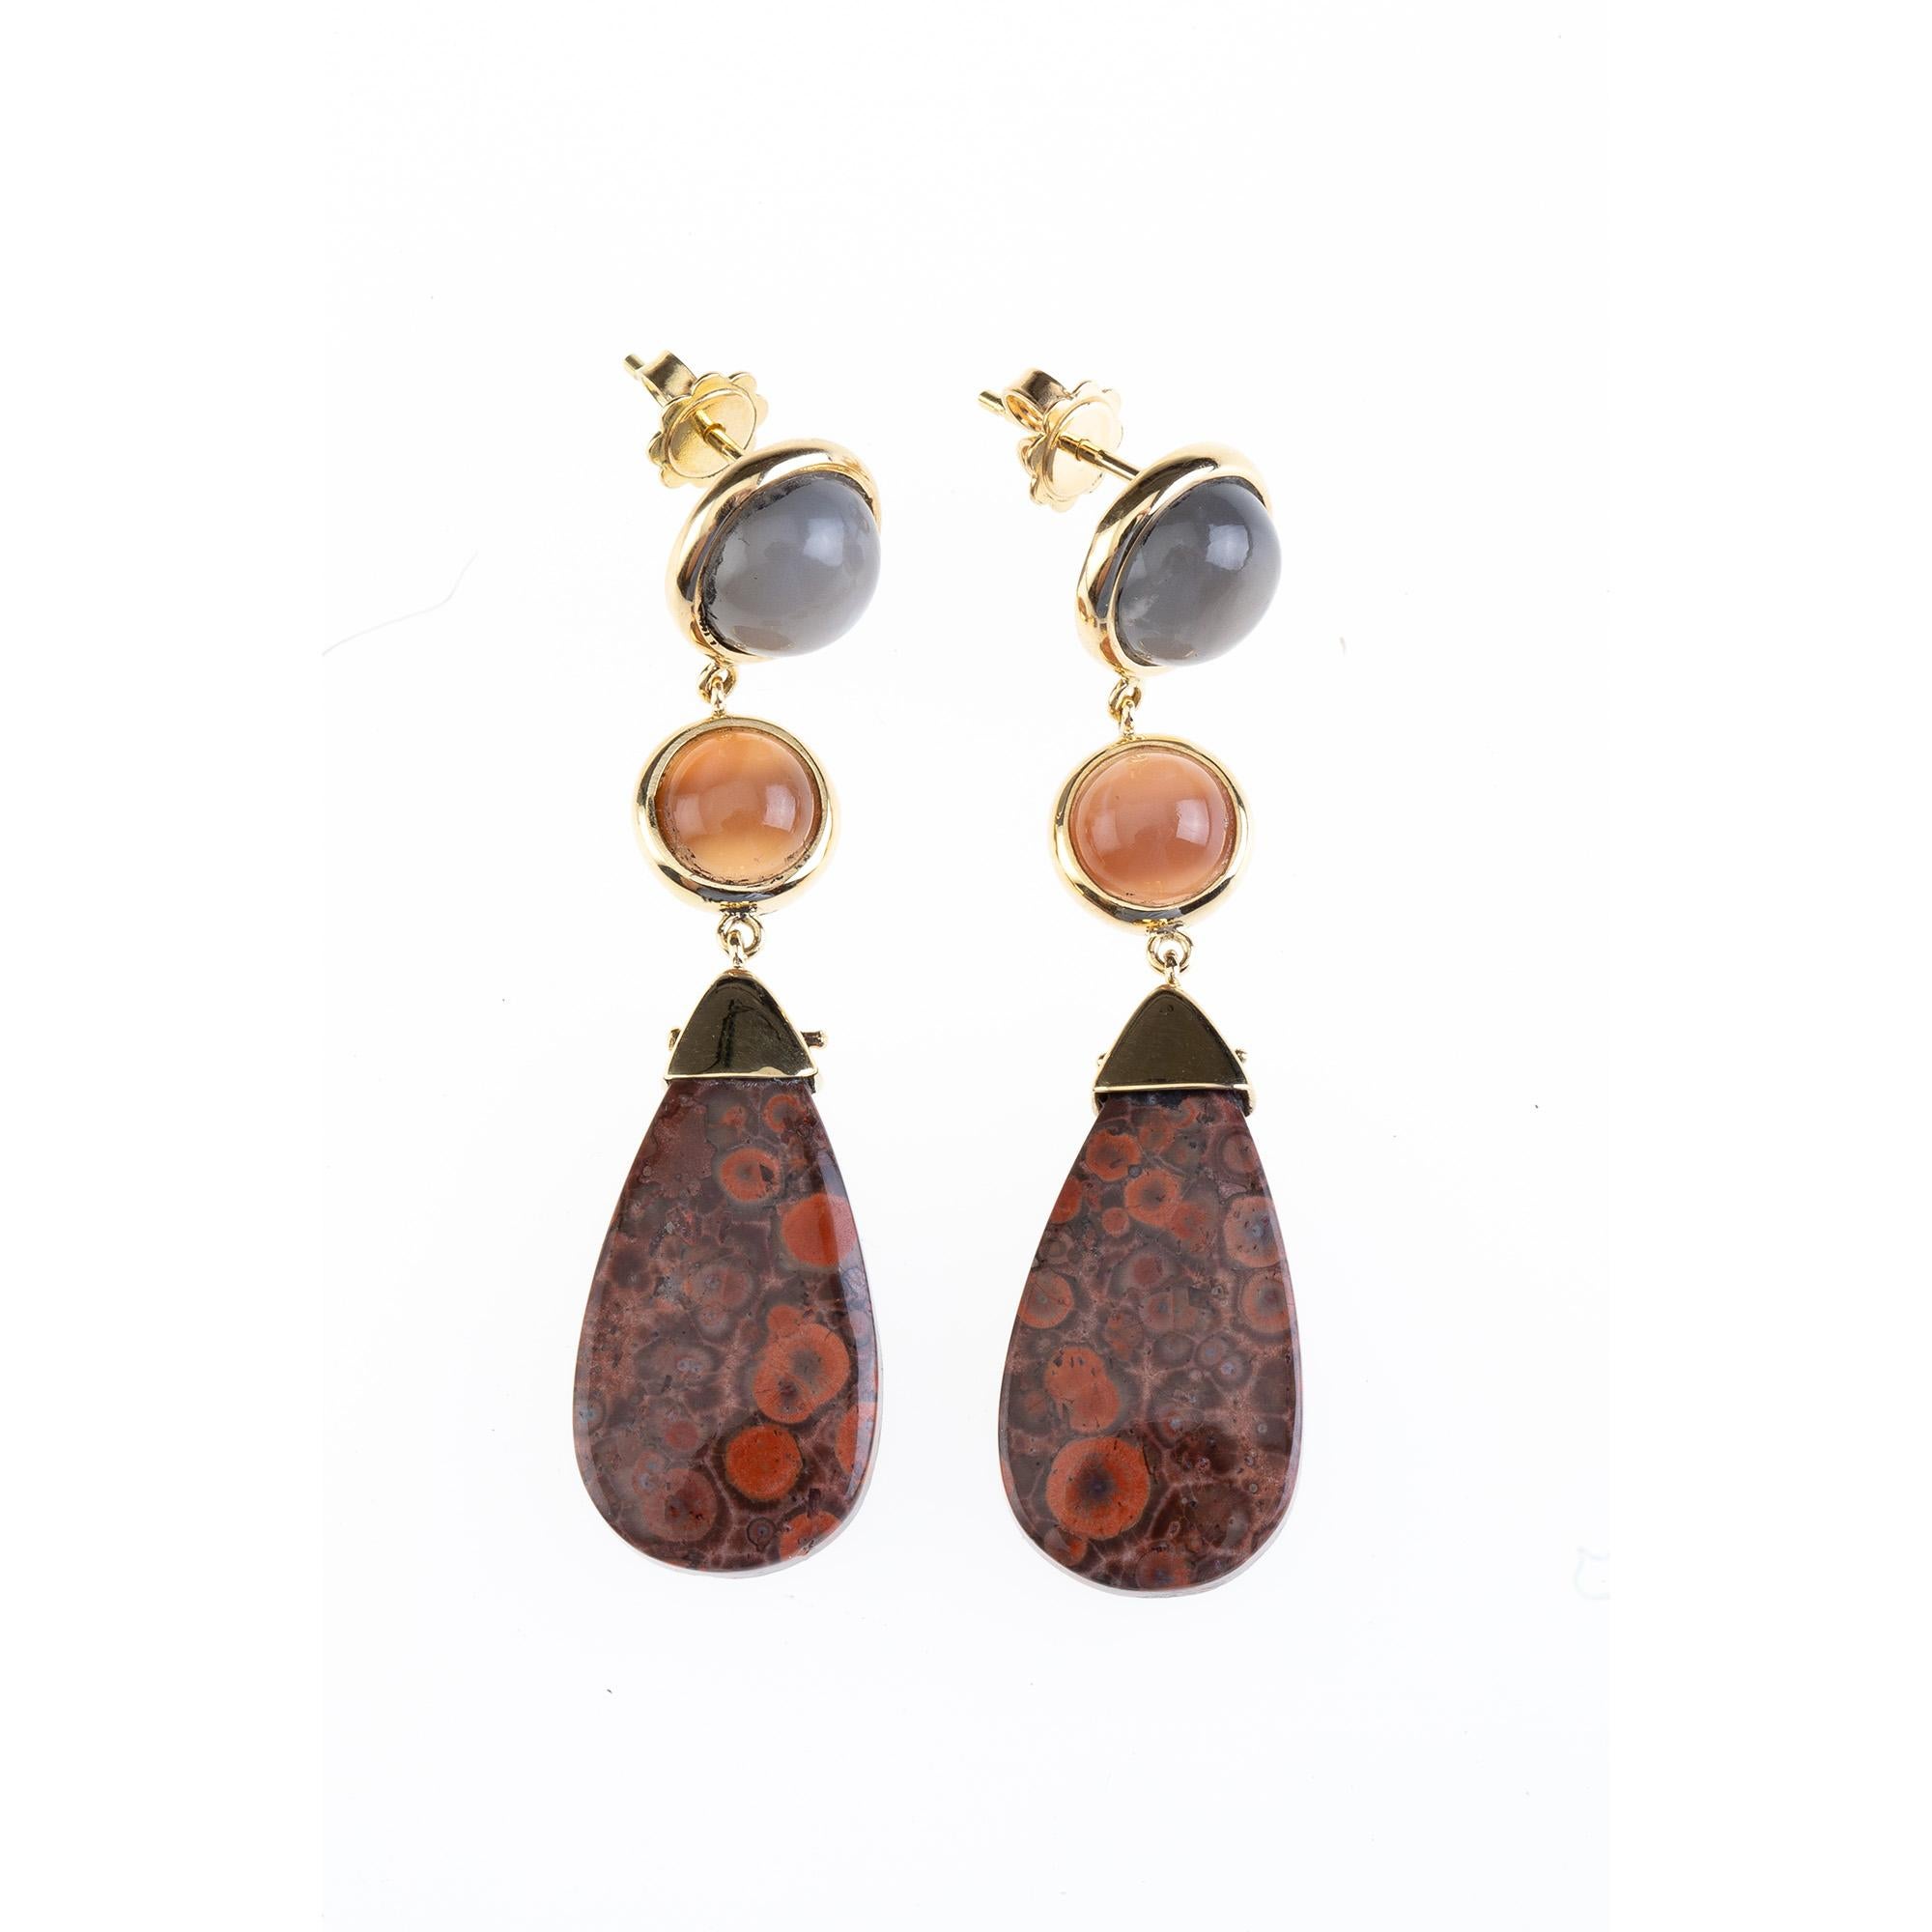 Cabochon Labradorite and opal with drop of Picasso jasper 18k gold gr 12,10  earrings.
All Giulia Colussi jewelry is new and has never been previously owned or worn. Each item will arrive at your door beautifully gift wrapped in our boxes, put